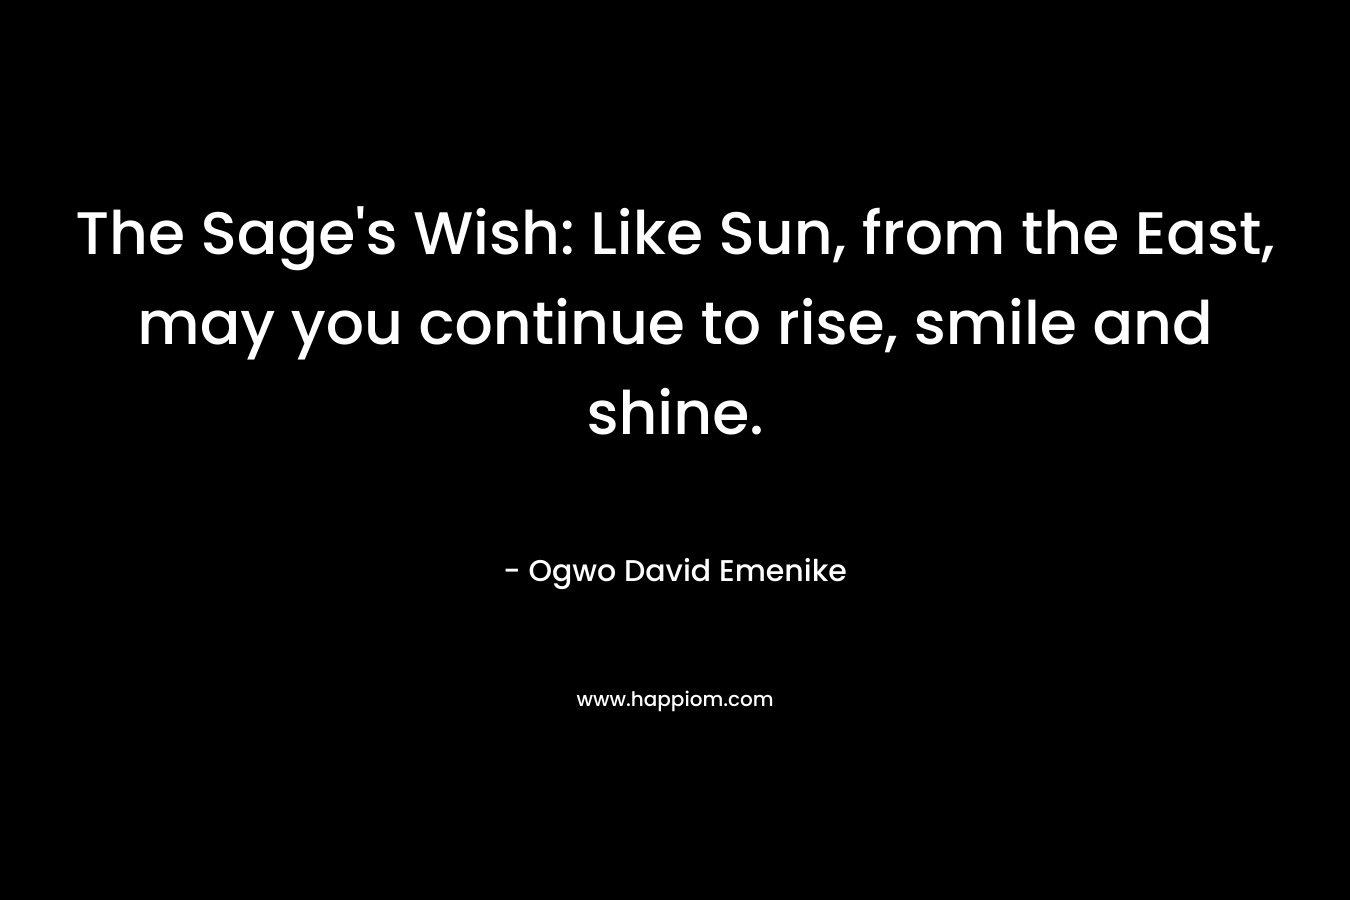 The Sage’s Wish: Like Sun, from the East, may you continue to rise, smile and shine. – Ogwo David Emenike